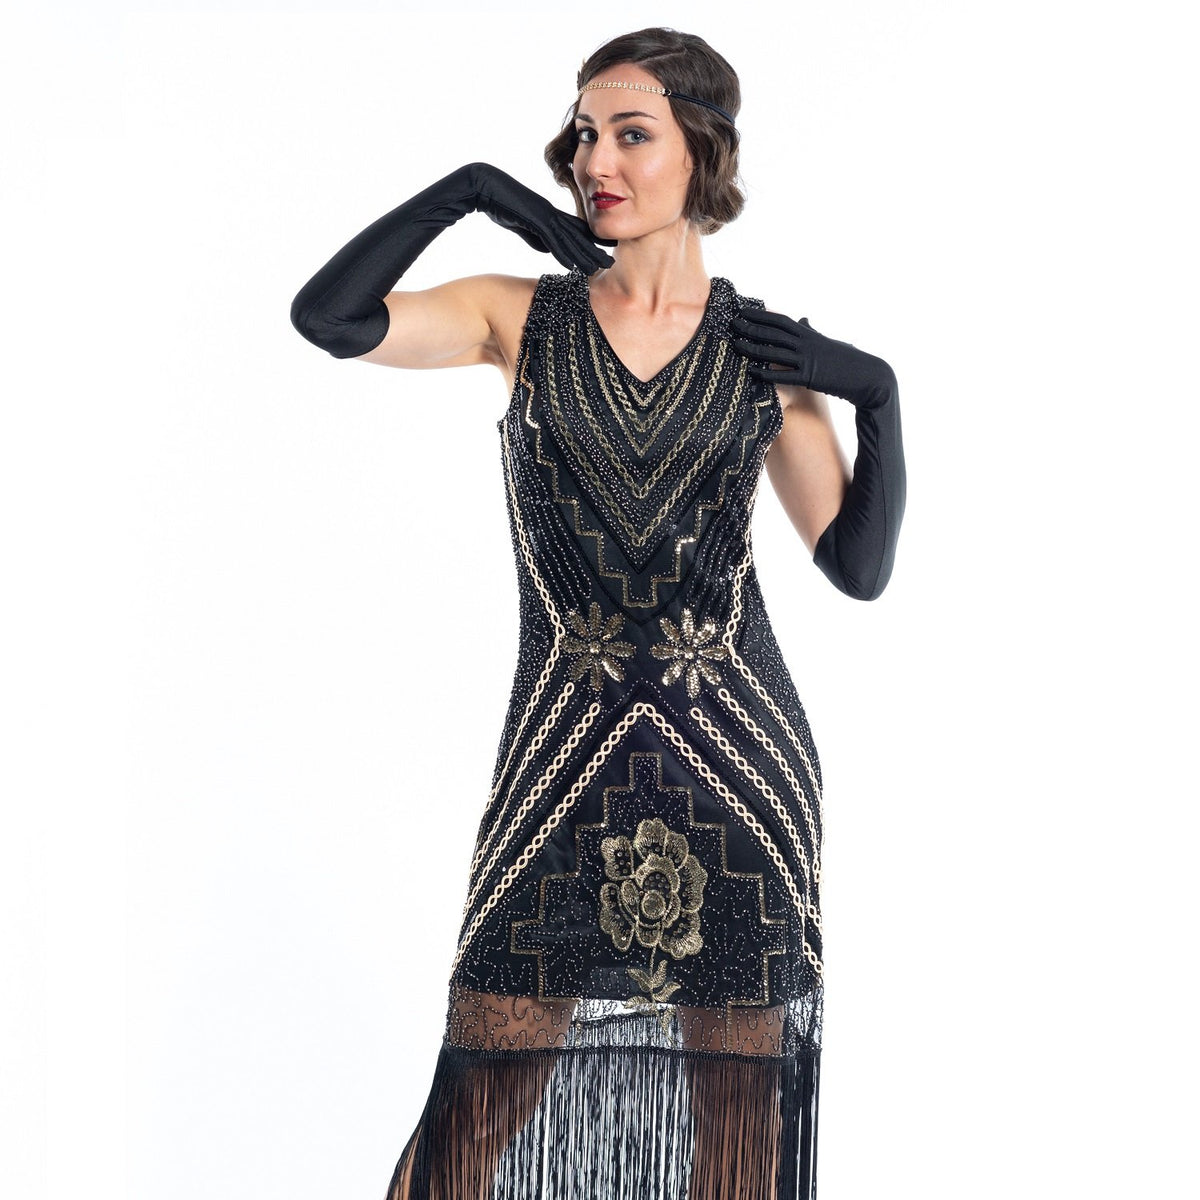 A Black Vintage Gatsby Dress with gold sequins, gold beads and black fringes - Close View